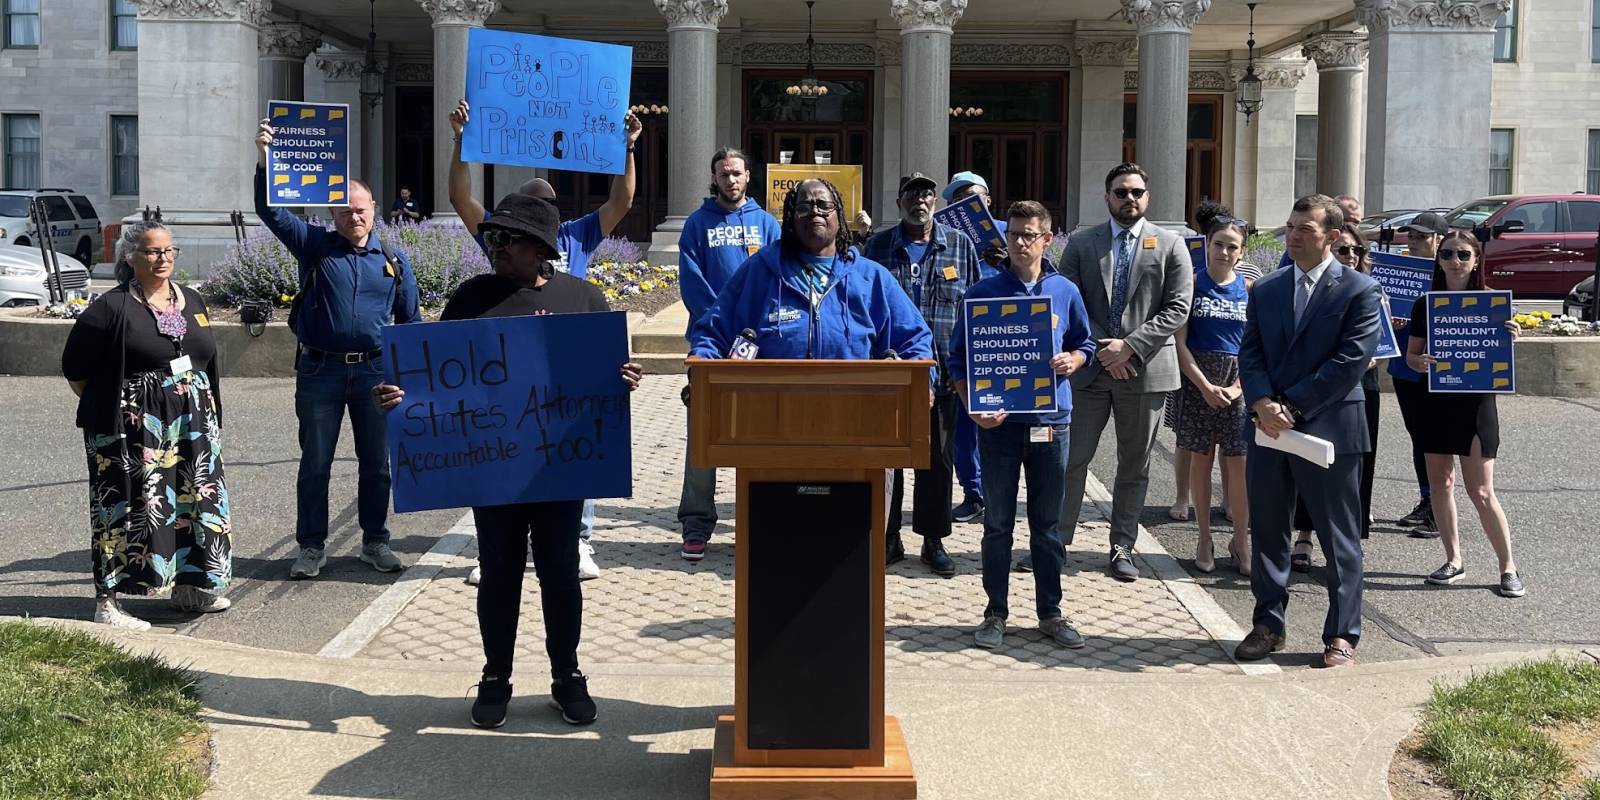 Smart Justice leaders are gathered in front of the Capitol to speak about prosecutorial accountability and one leader, in the center, stands at the podium as they speak.